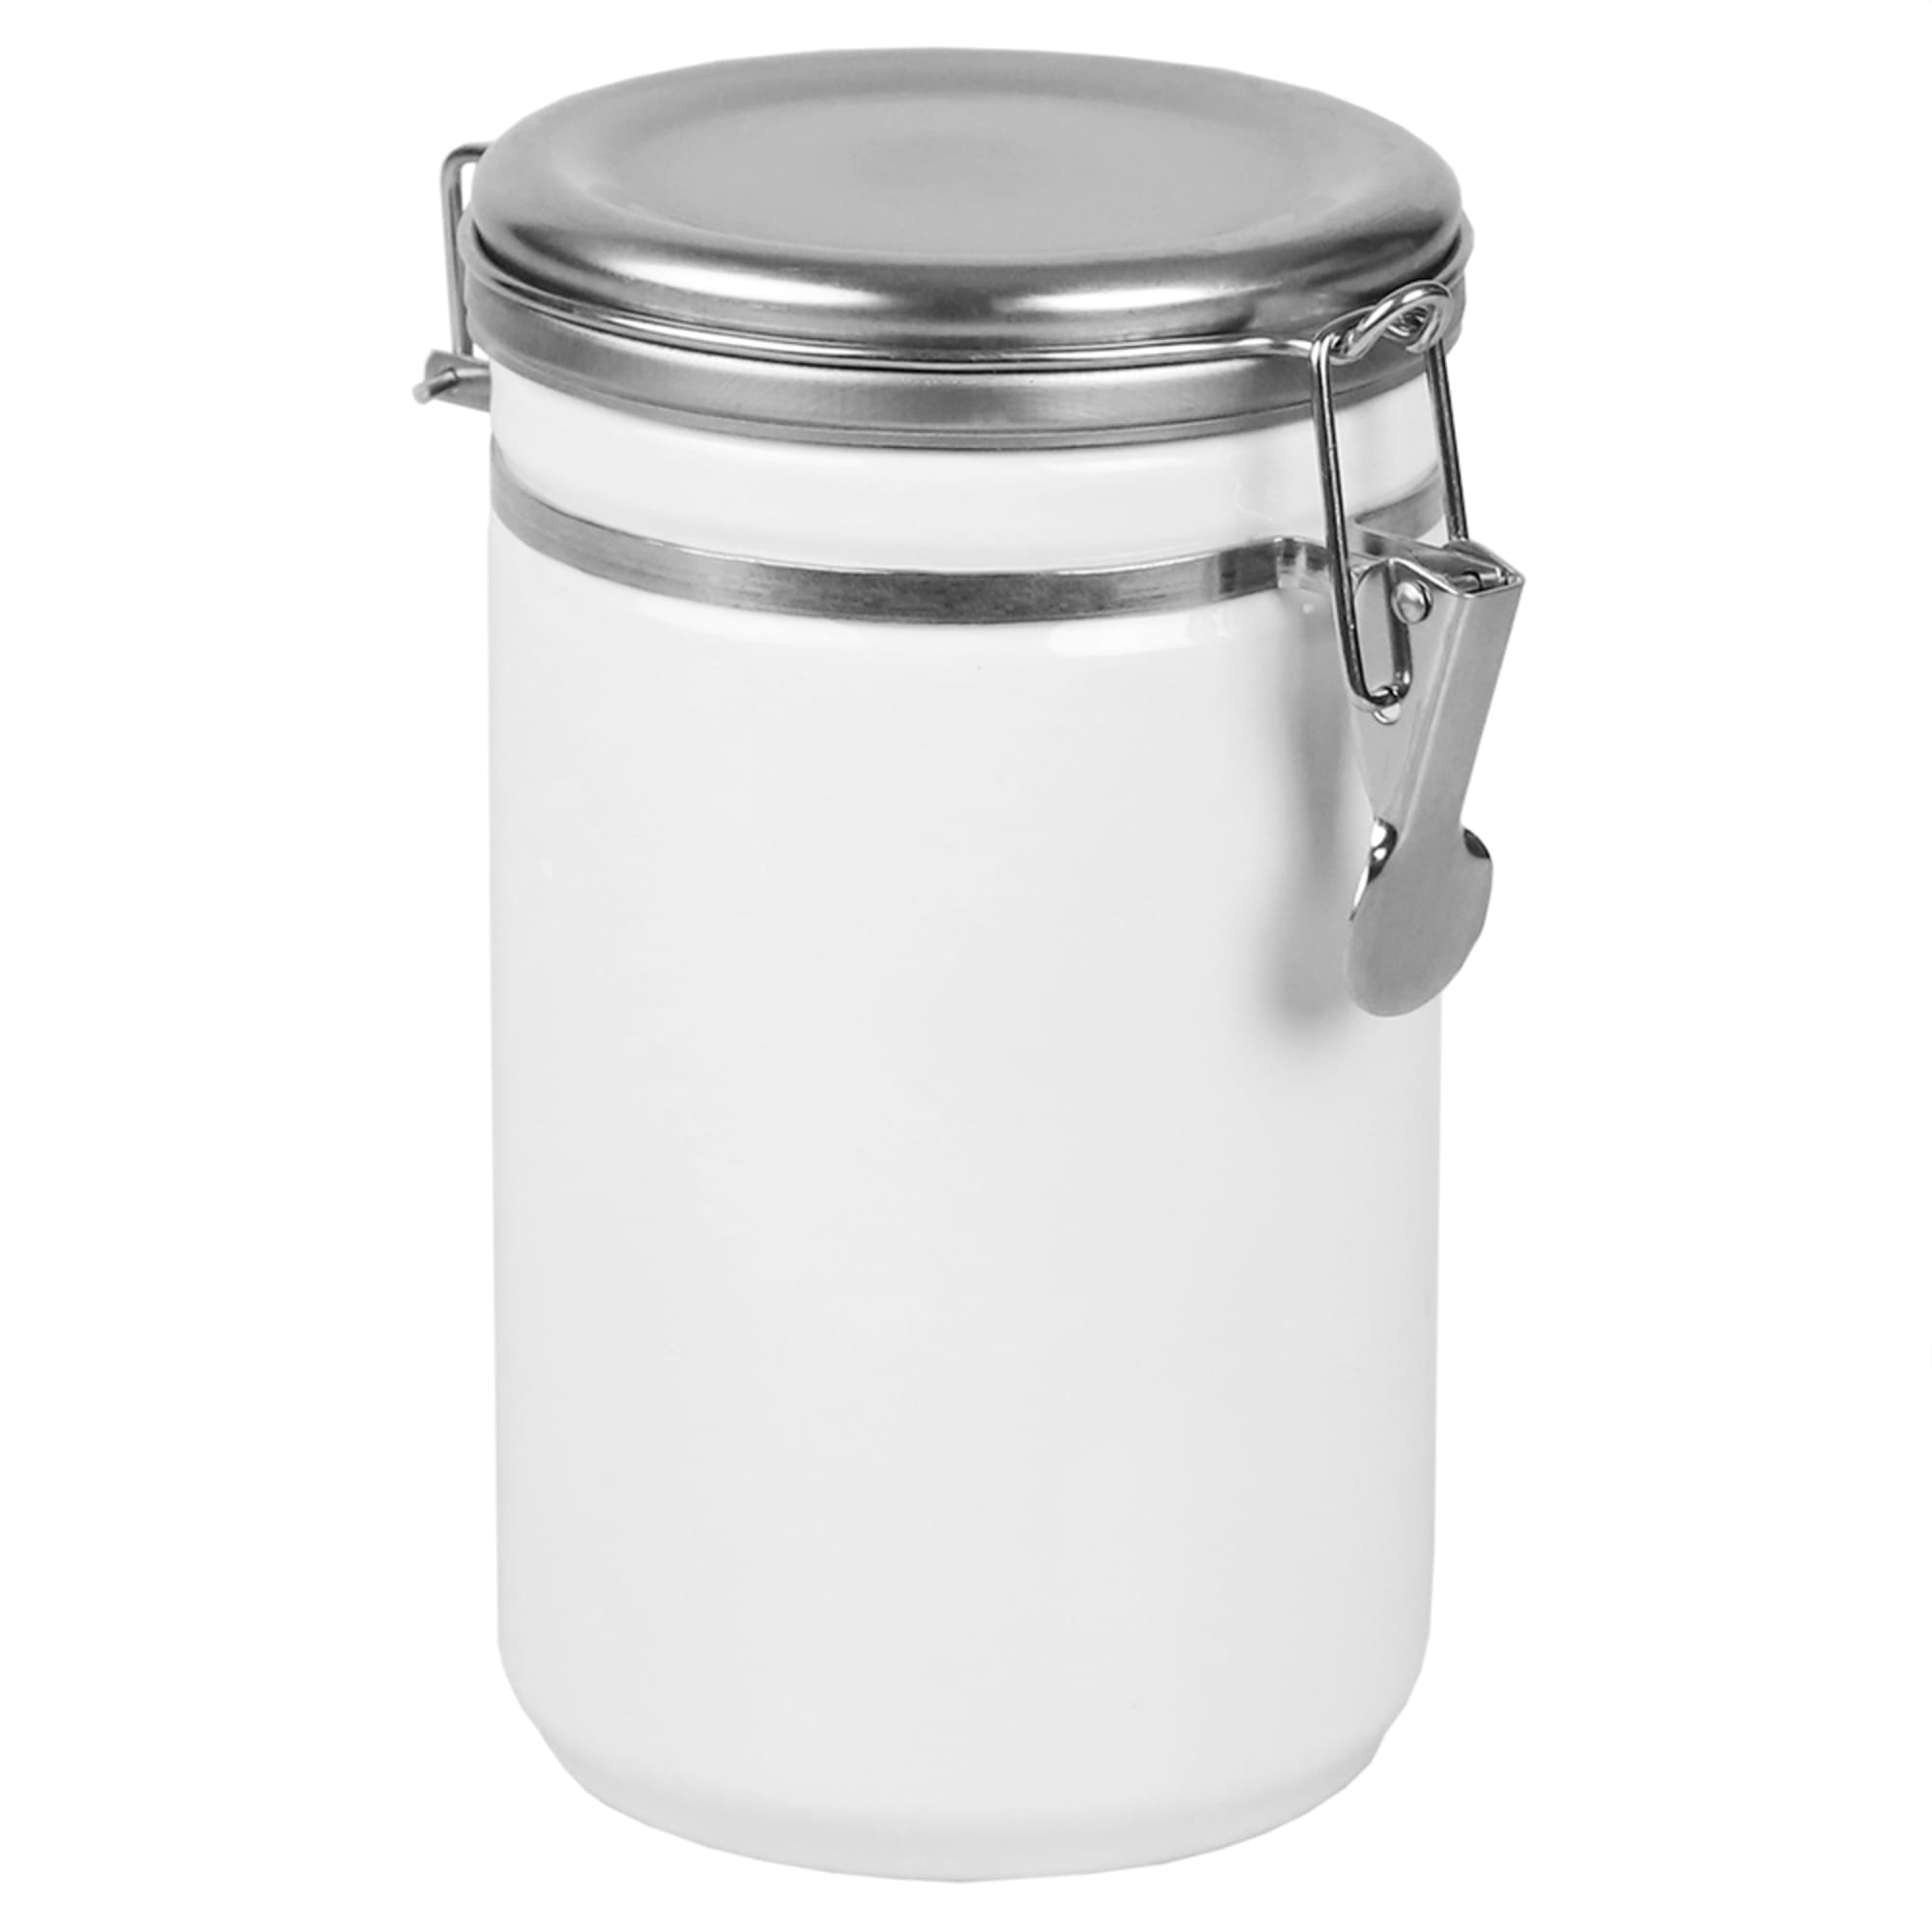 Home Basics 45 oz. Canister with Stainless Steel Top, White $8 EACH, CASE PACK OF 8